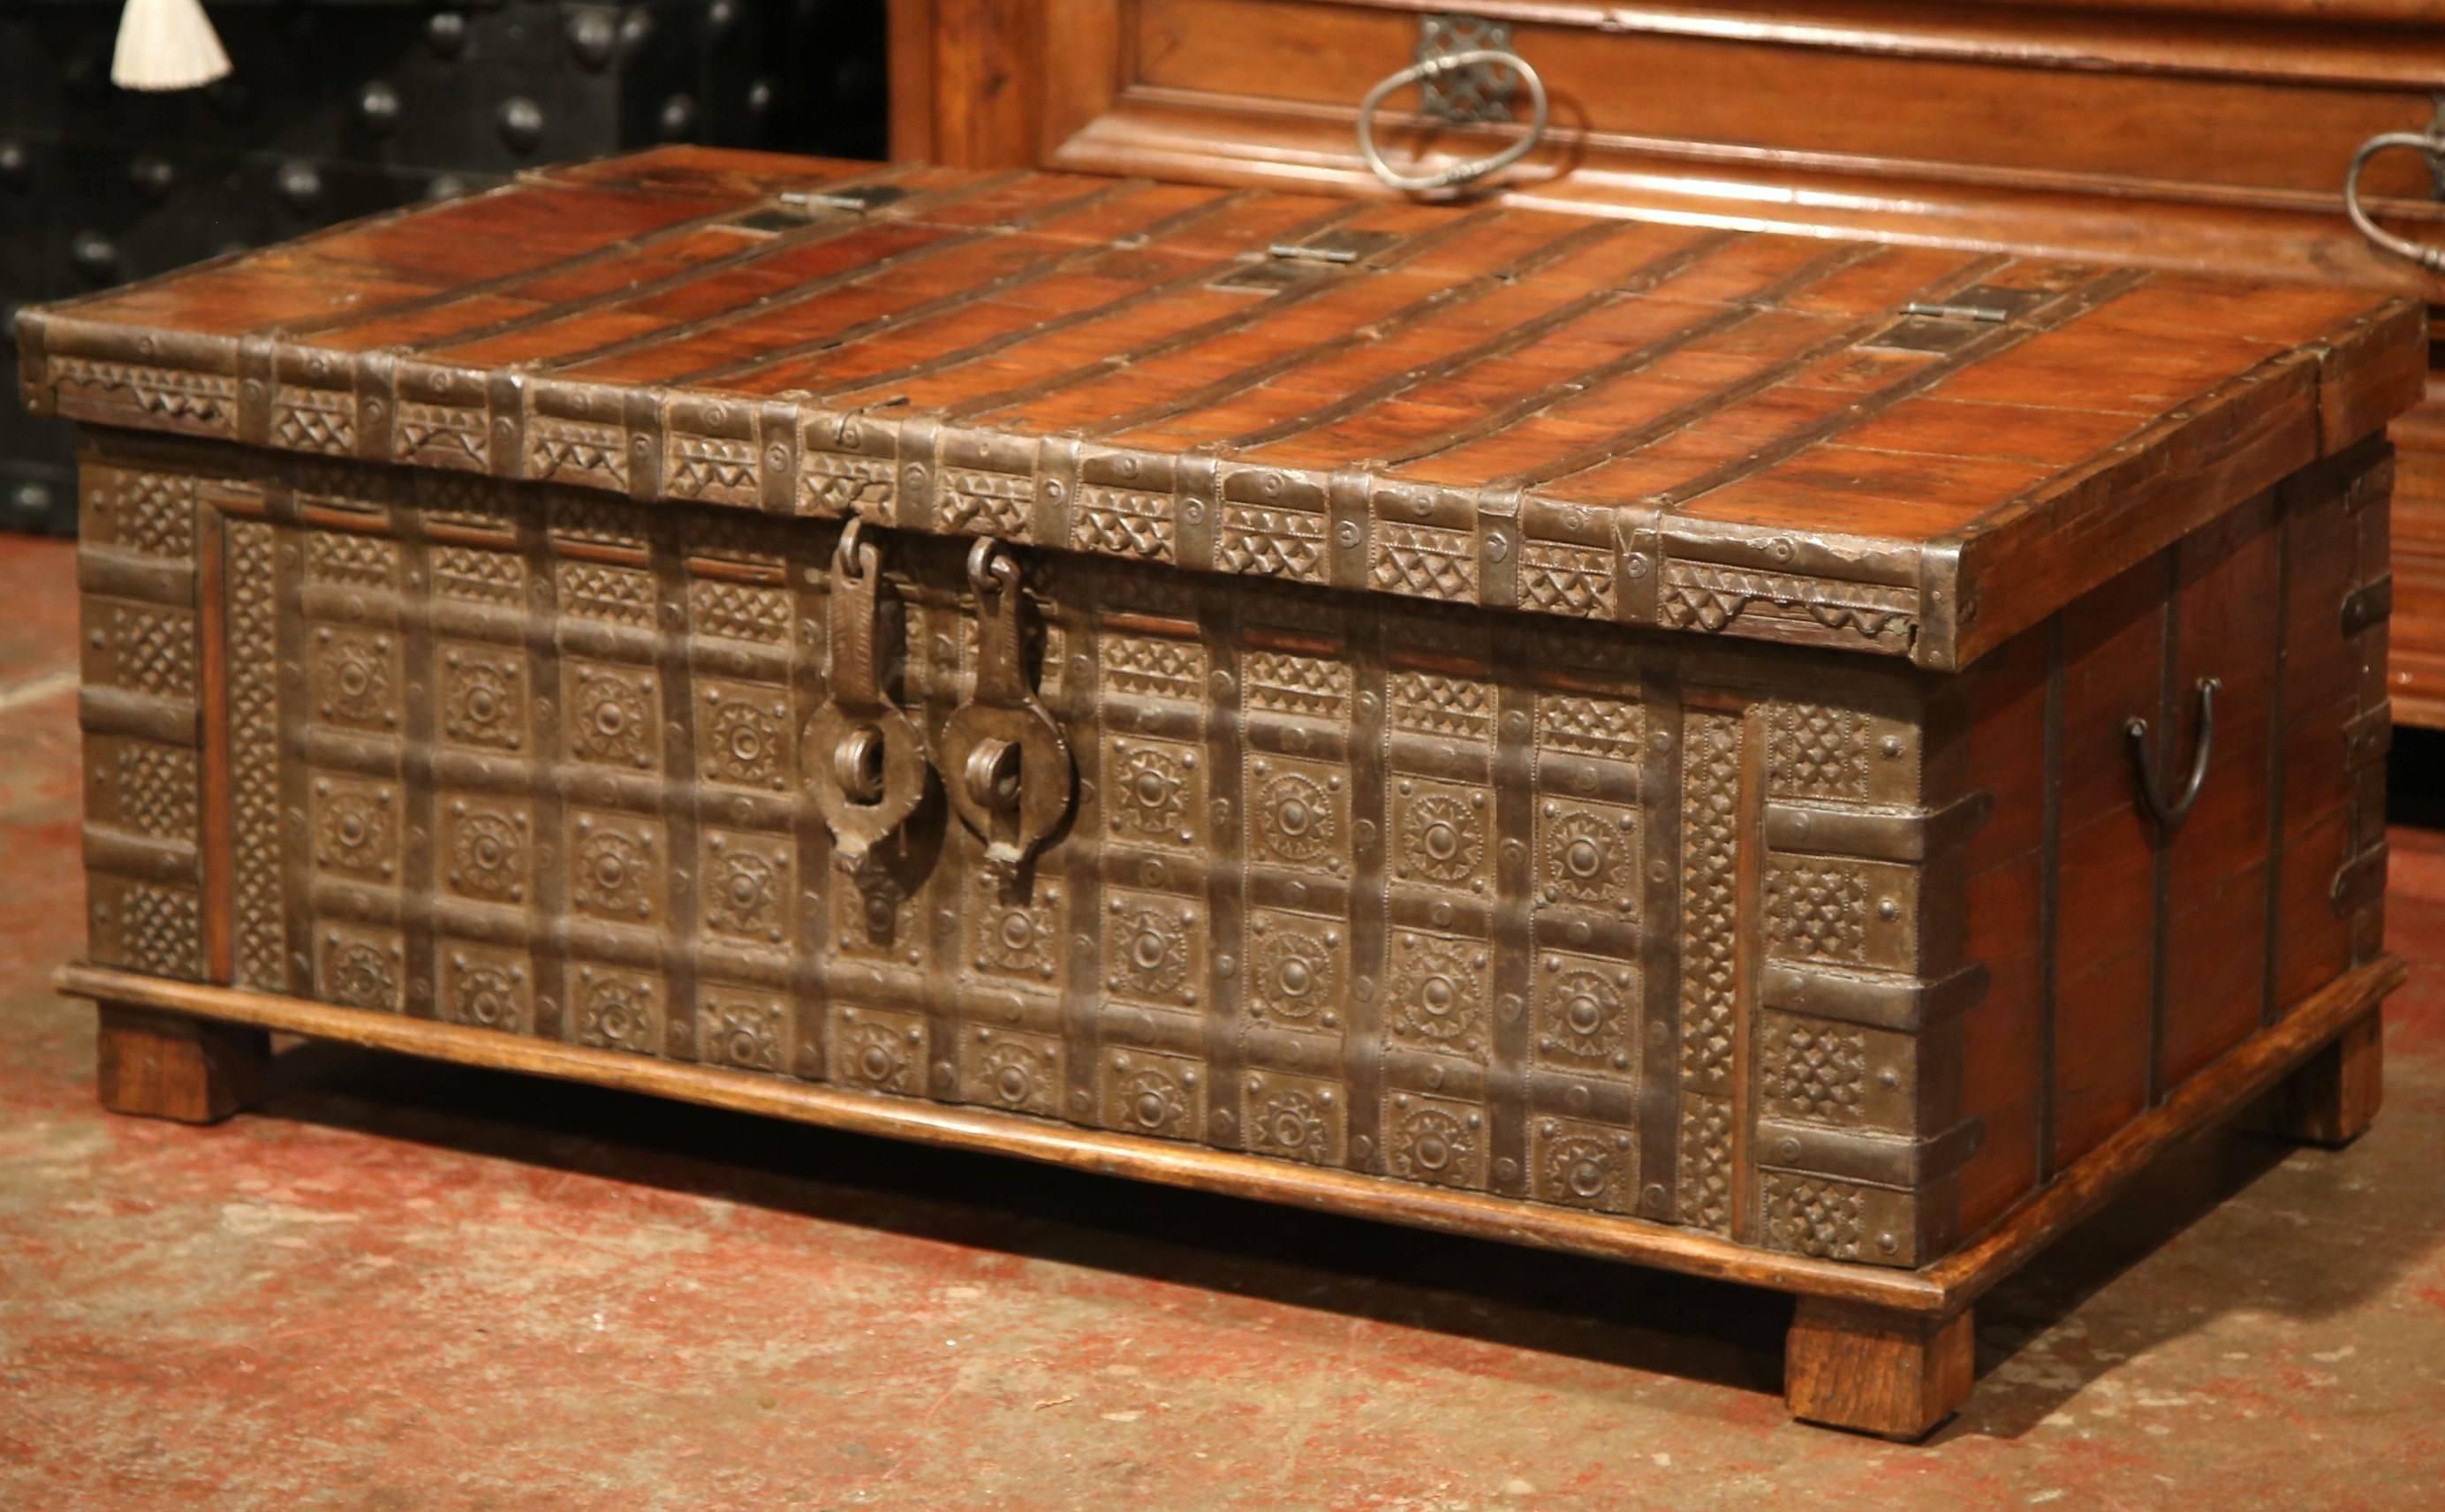 19th Century English Carved Chestnut Trunk Coffee Table with Heavy Hardware 2